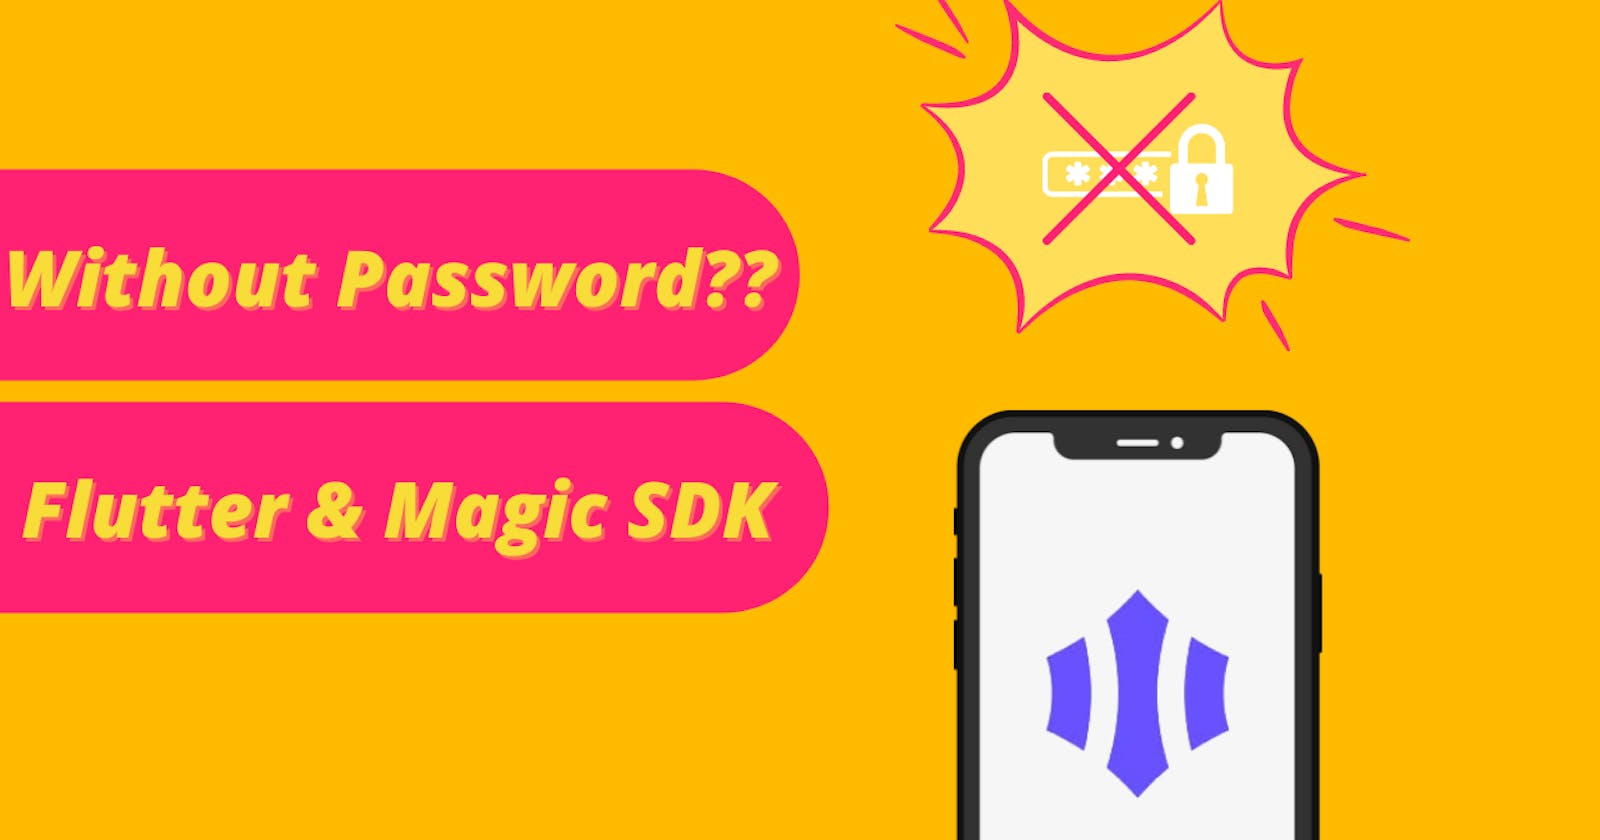 How to enable Passwordless Authentication using Flutter & Magic SDK